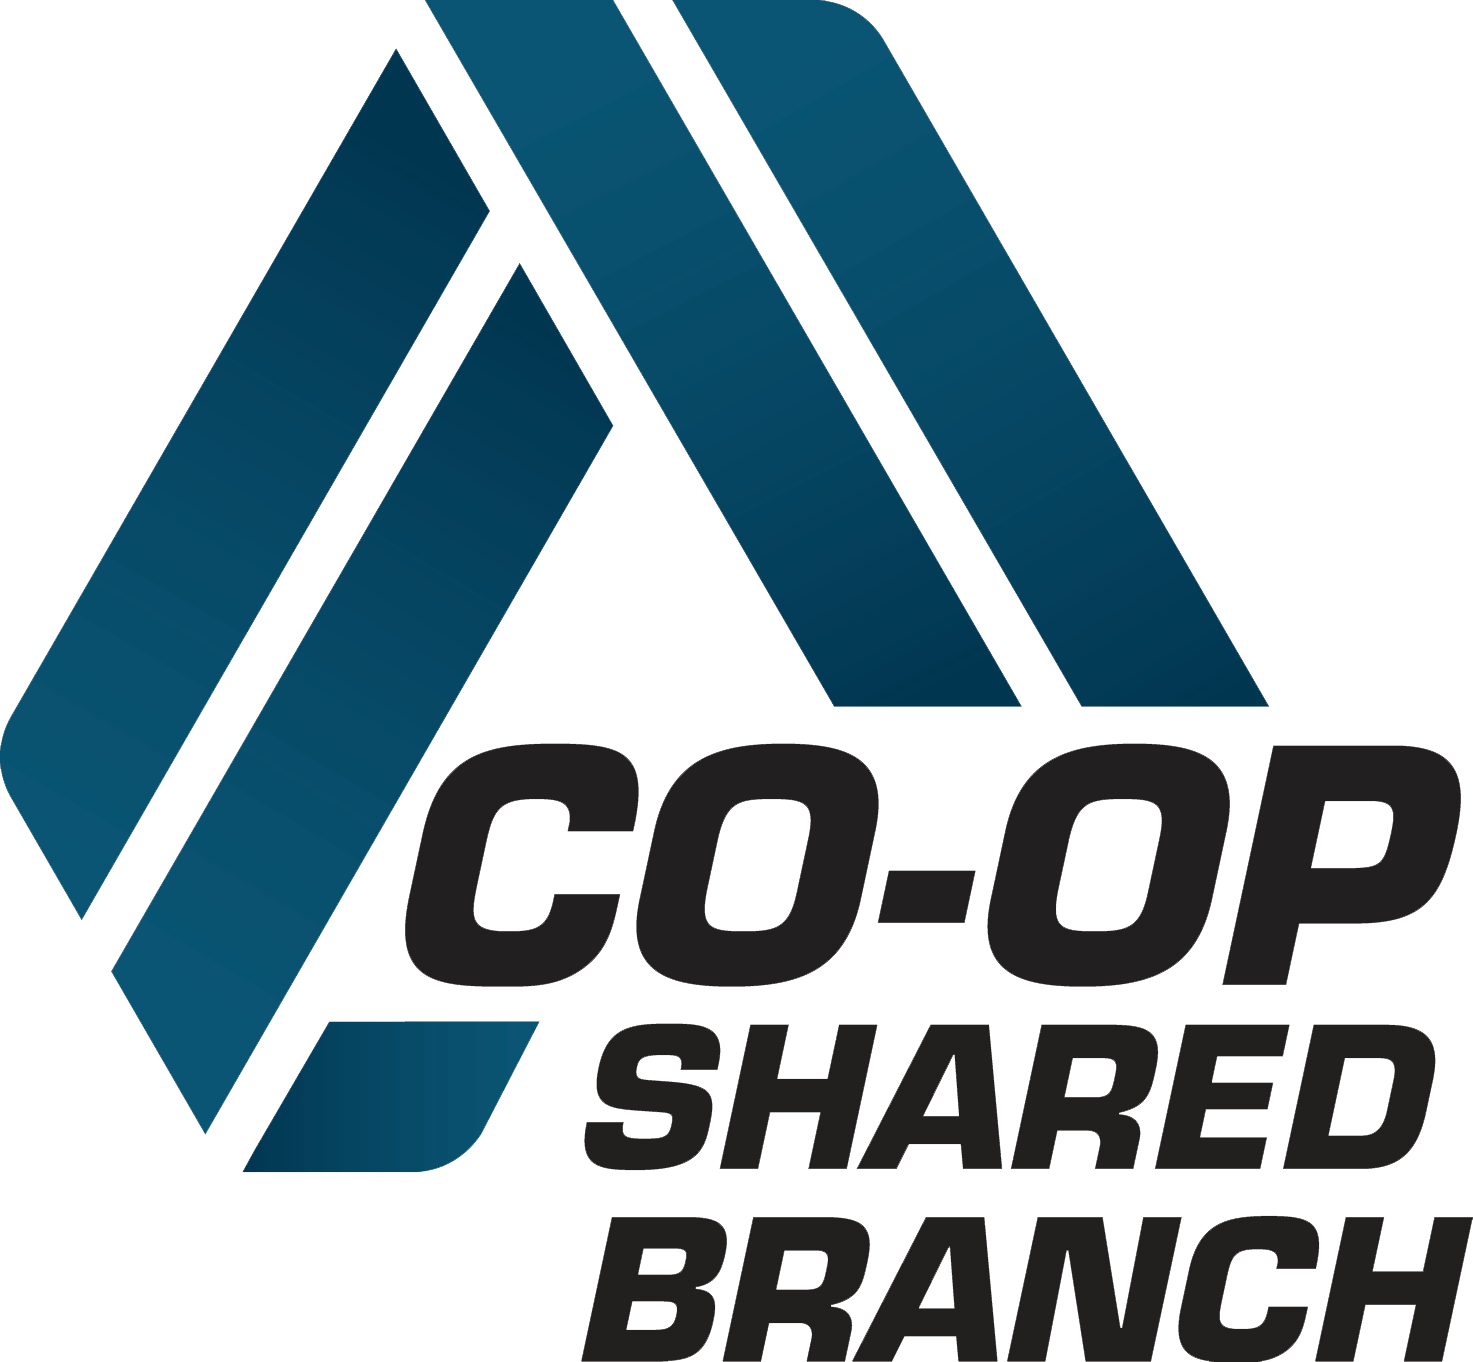 Co-op Shared Branching